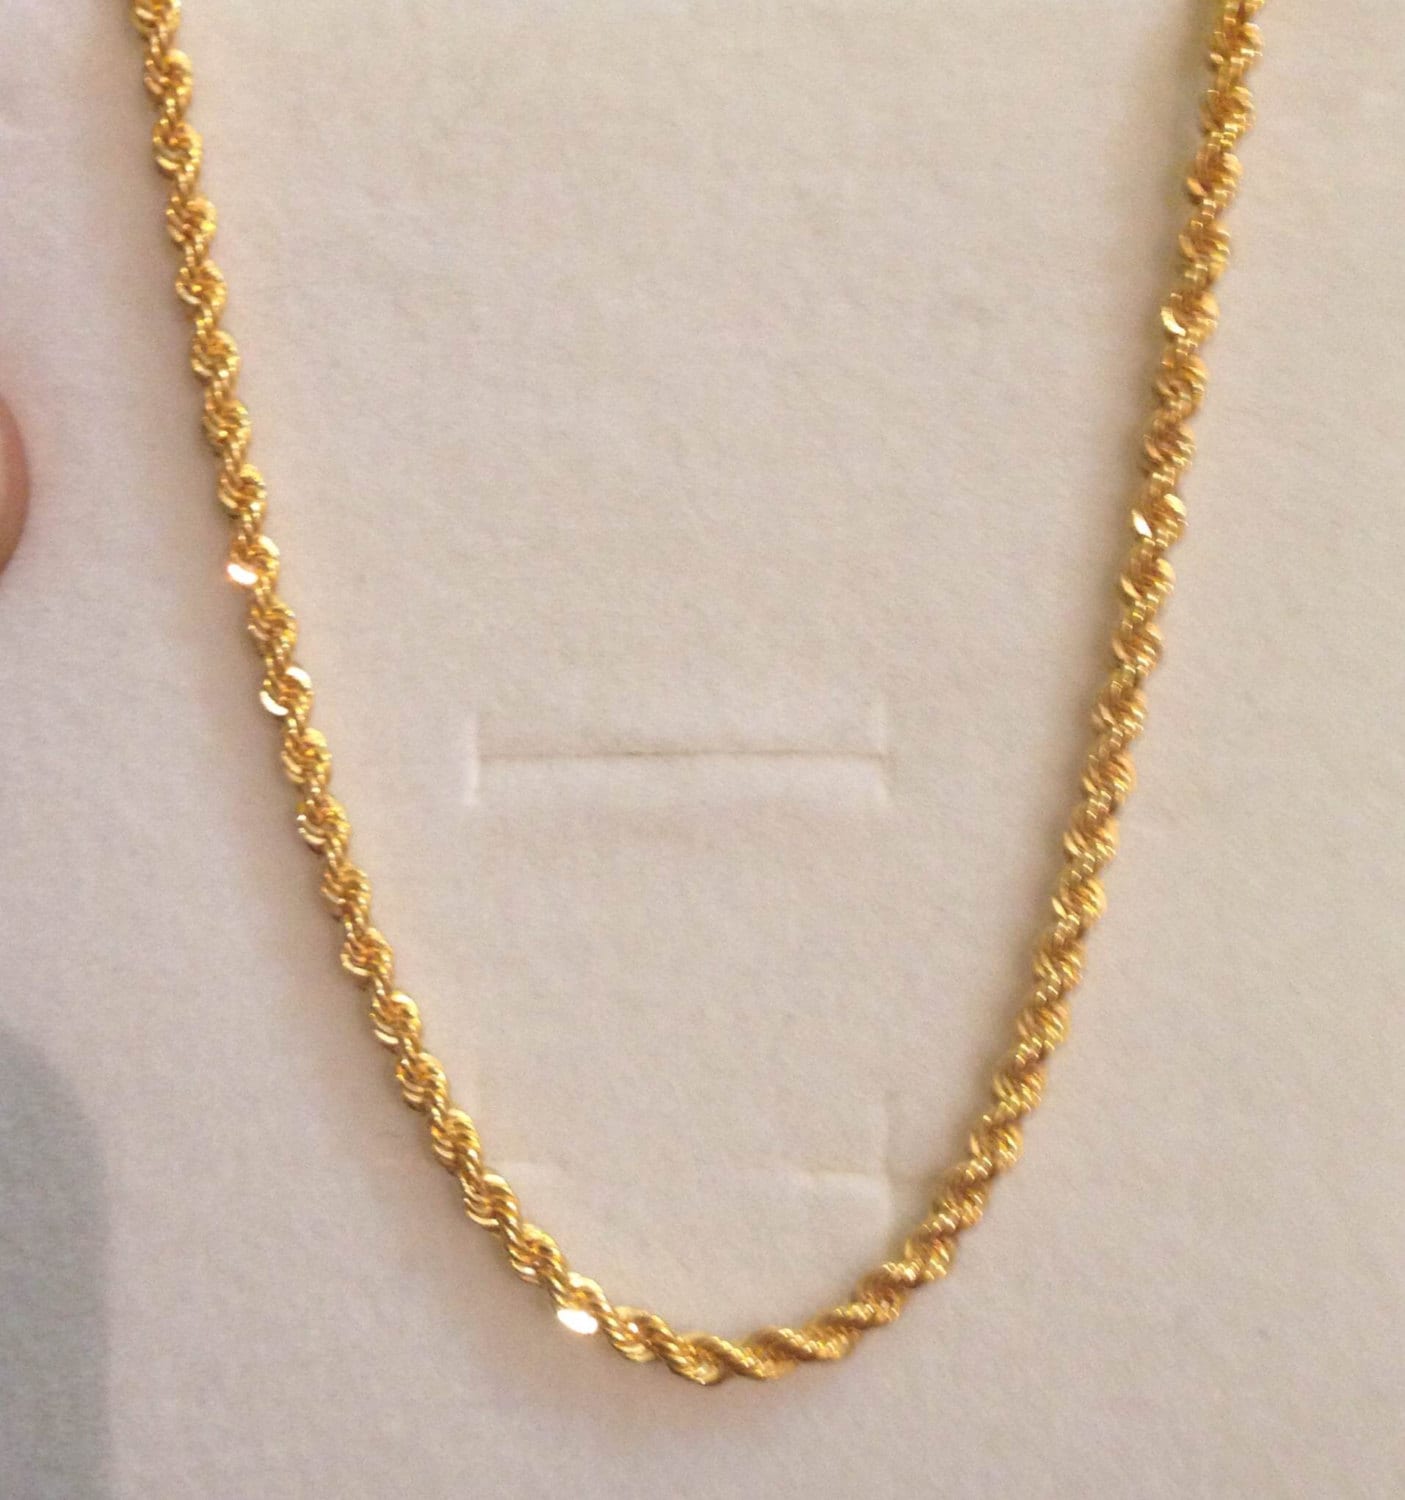 Solid Gold Rope Chain